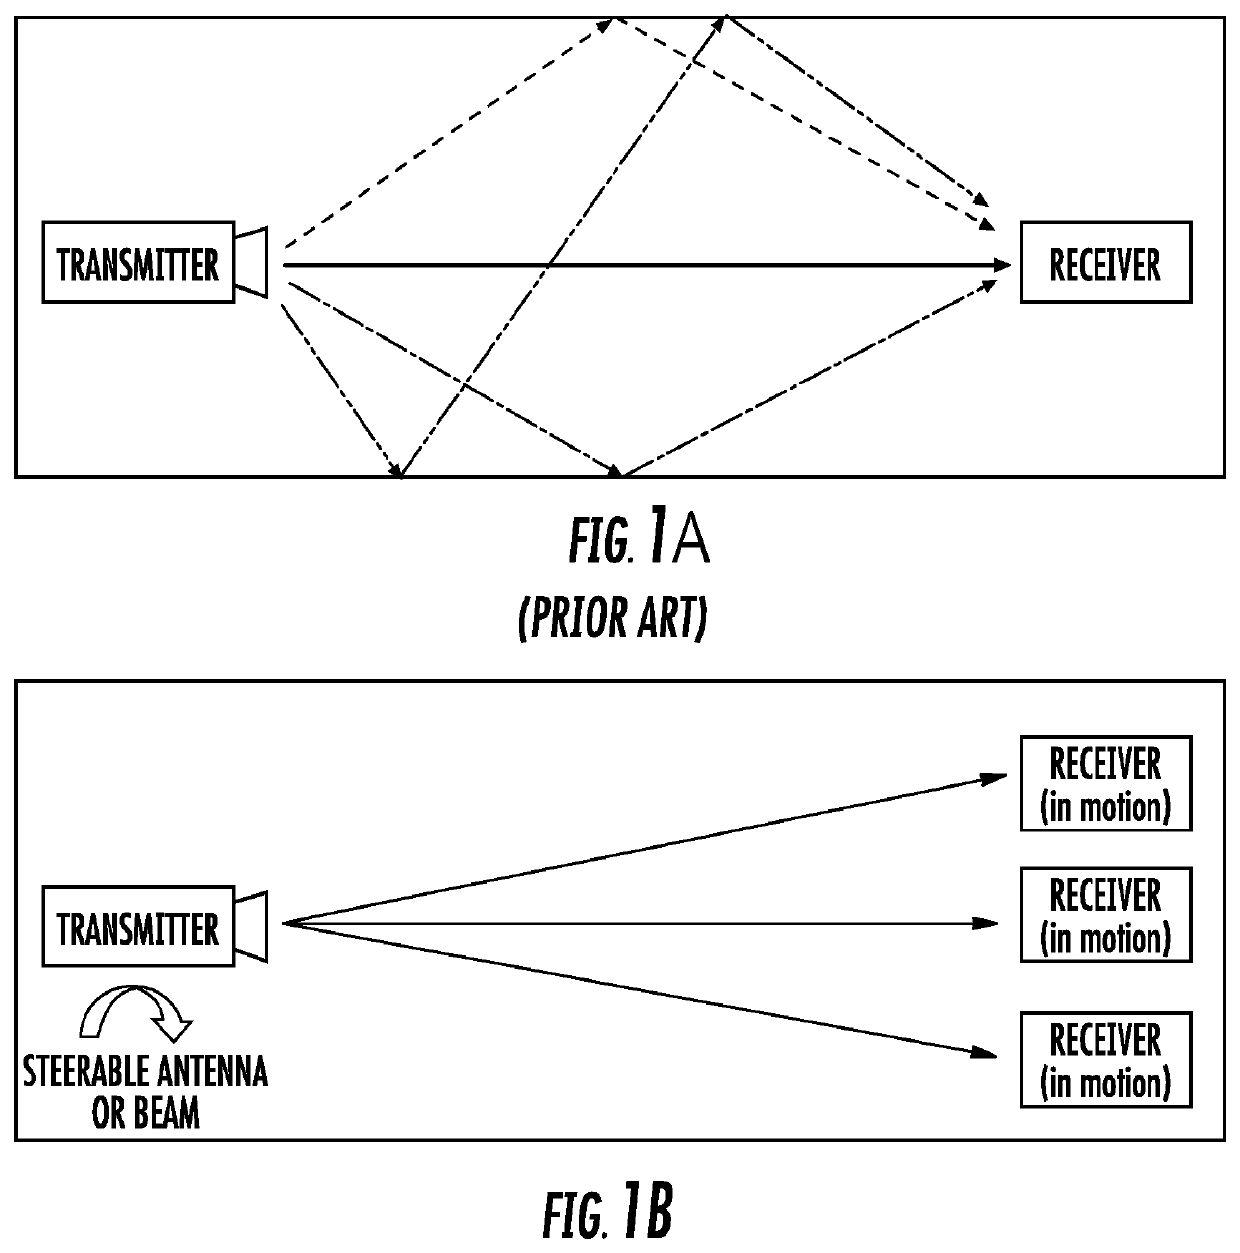 Processes systems and methods for improving virtual and augmented reality applications